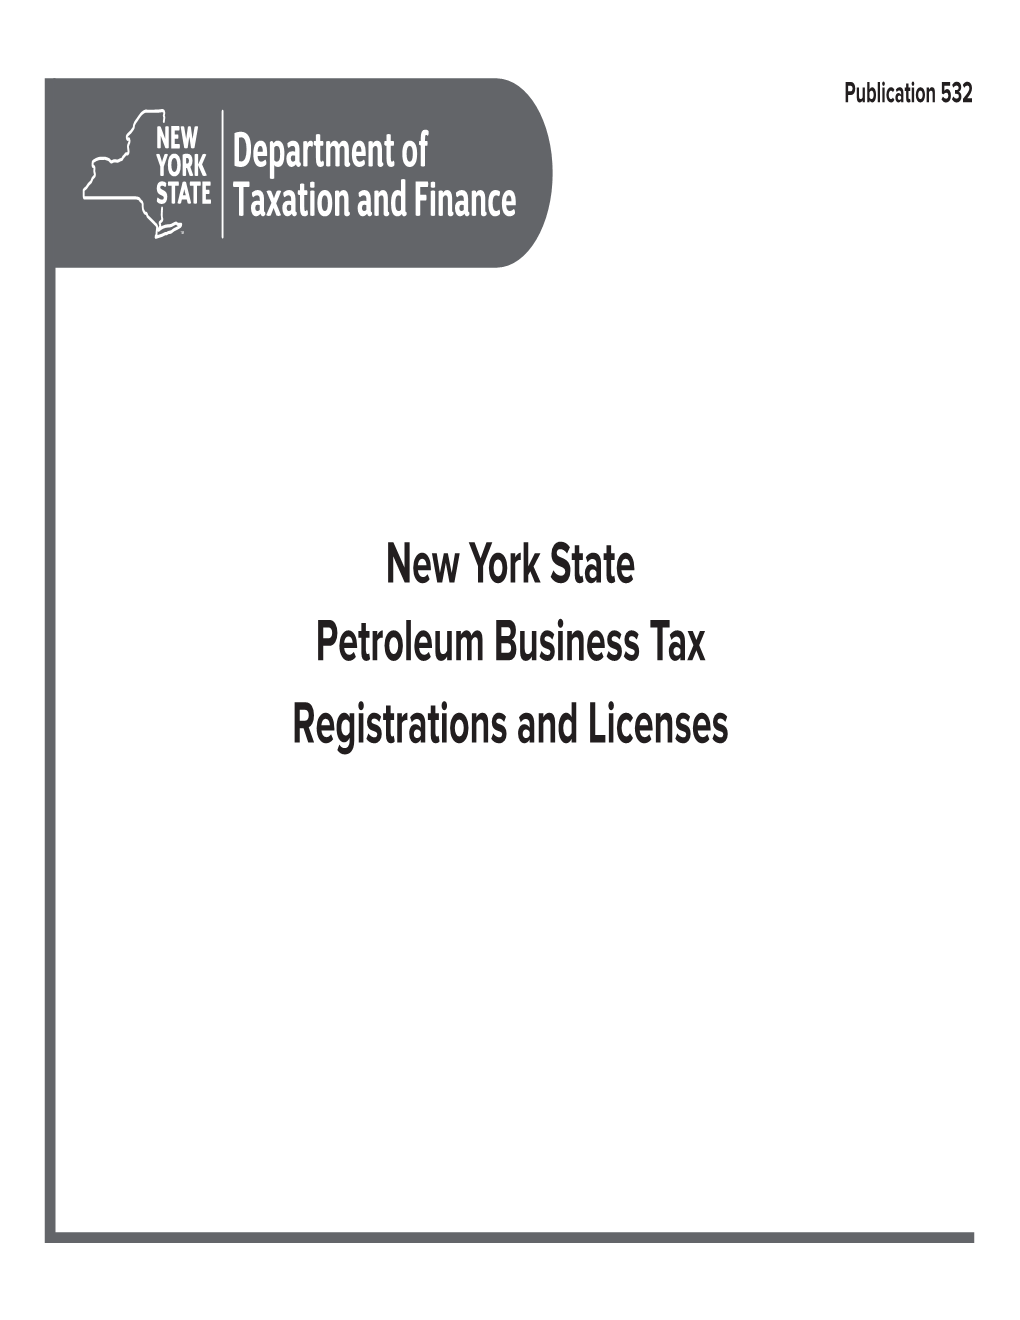 Publication 532:7/19:New York State Petroleum Business Tax